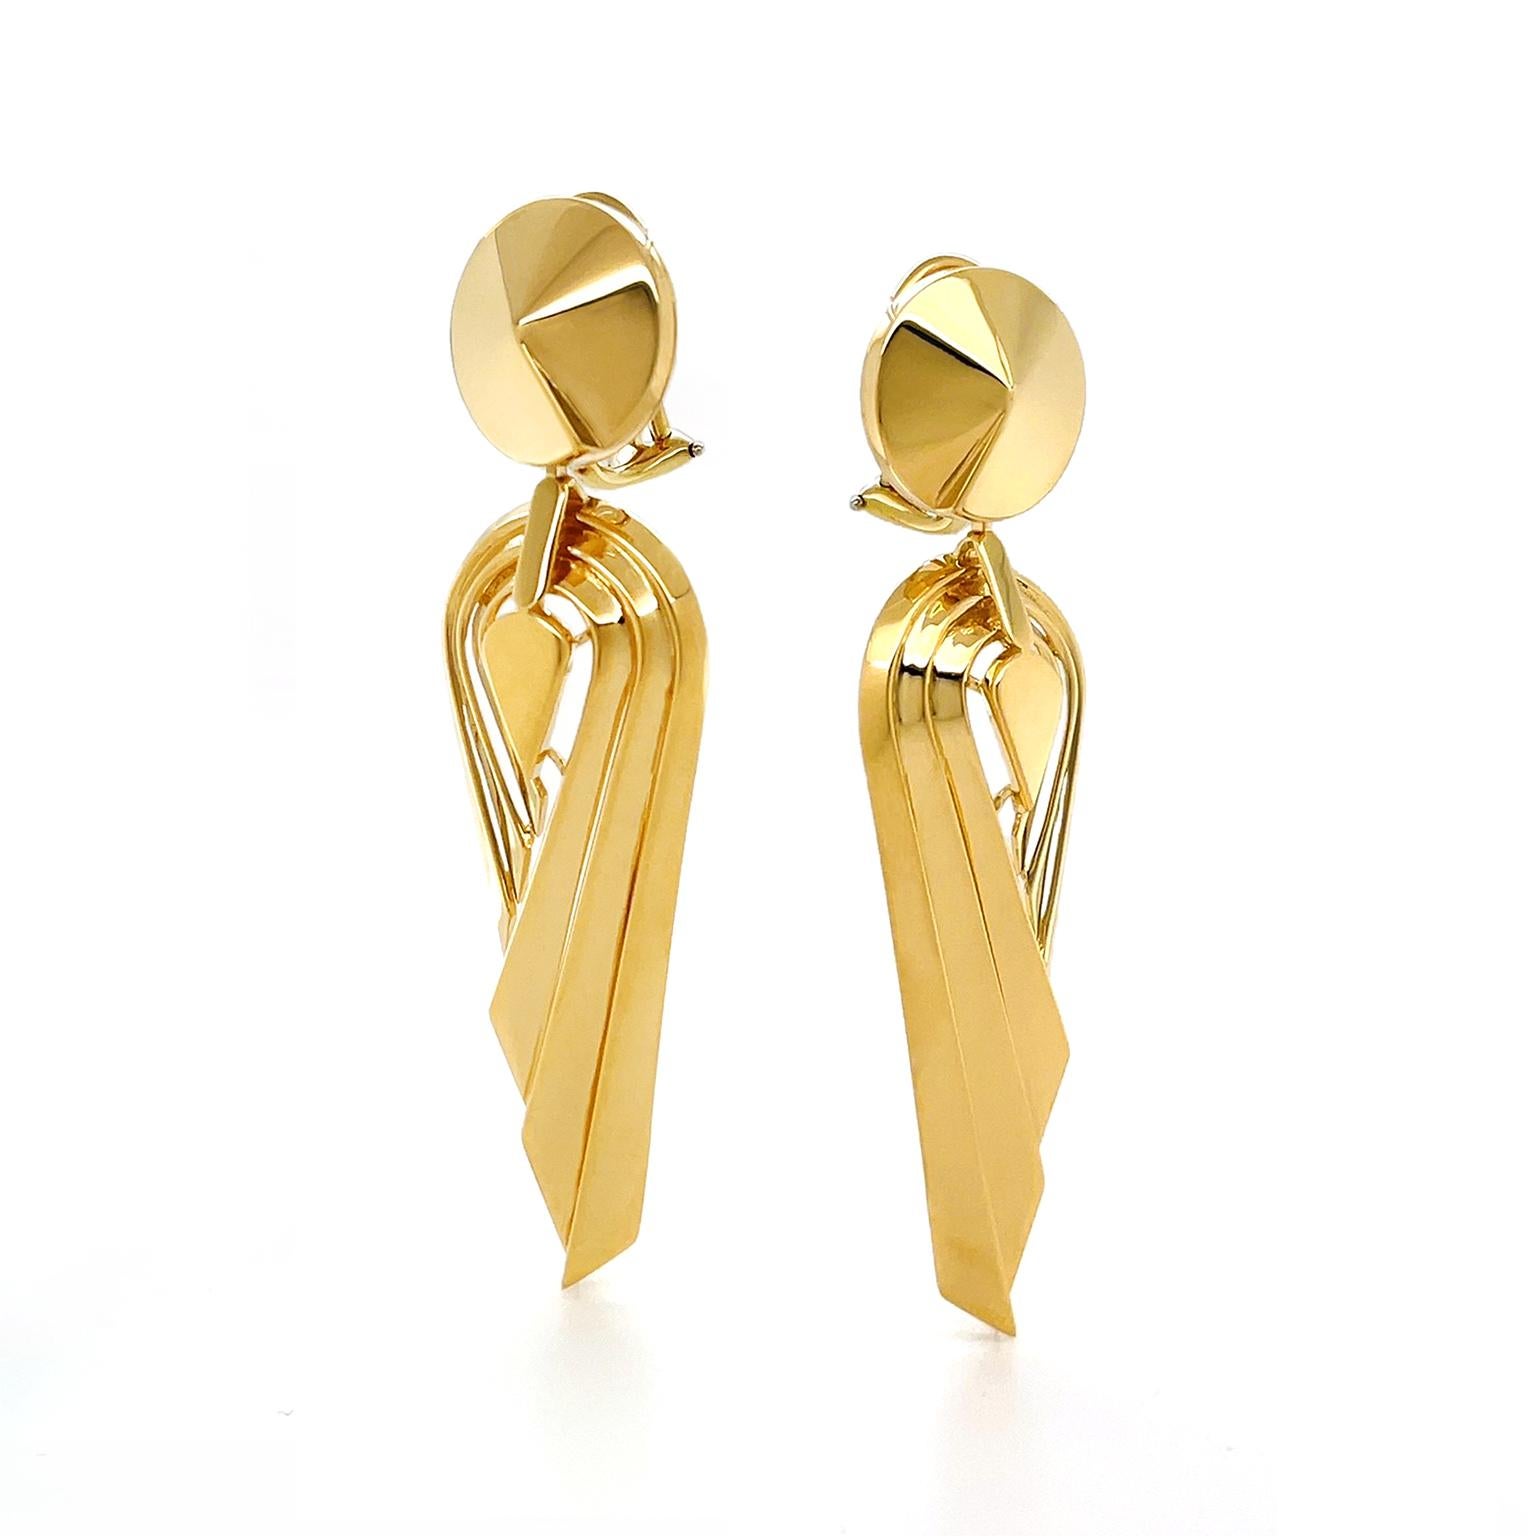 Influenced by the monochromatic styles and angles of Art Deco, the design of these drop earrings gives a modern update. Beginning with an 18k yellow gold raised pointed base, follows three grooved strips that form an upturned asymmetrical teardrop.